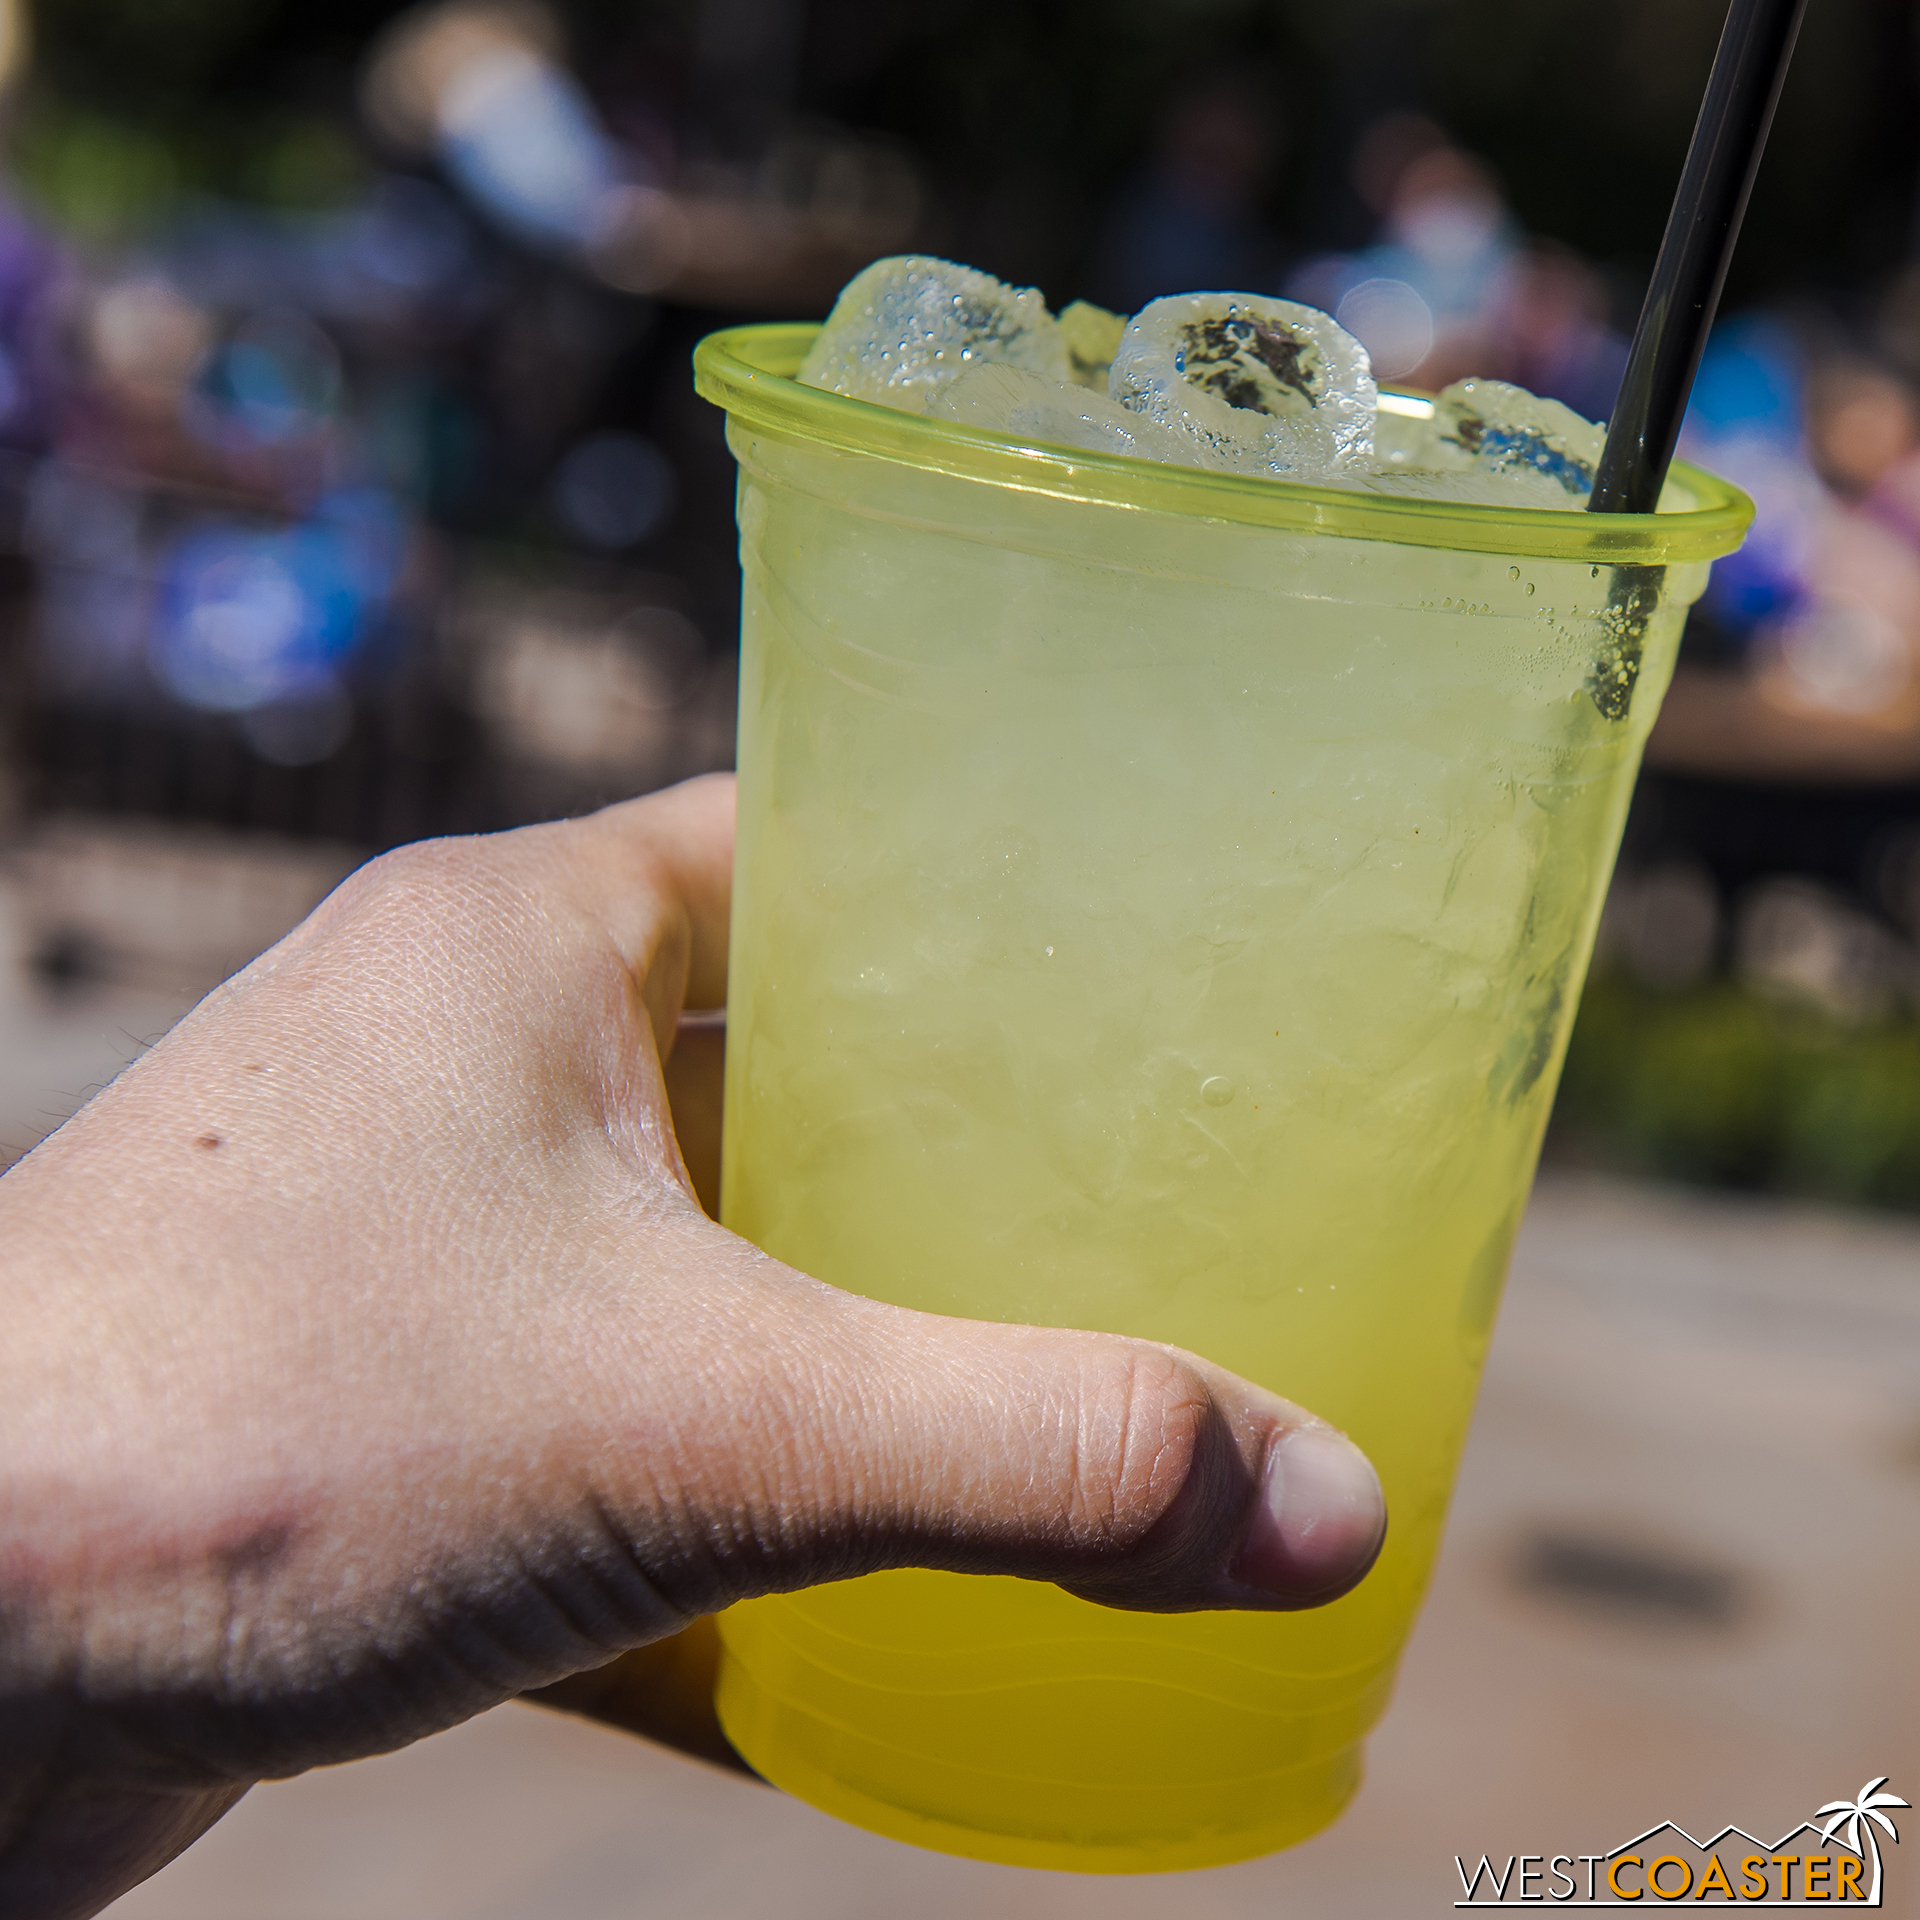  Meyer Lemon Ginger Mule @ Citrus Grove  This favorite from last year is back this year and oh so refreshing!&nbsp; You can hardly taste the alcohol.&nbsp; It's very, very good. 